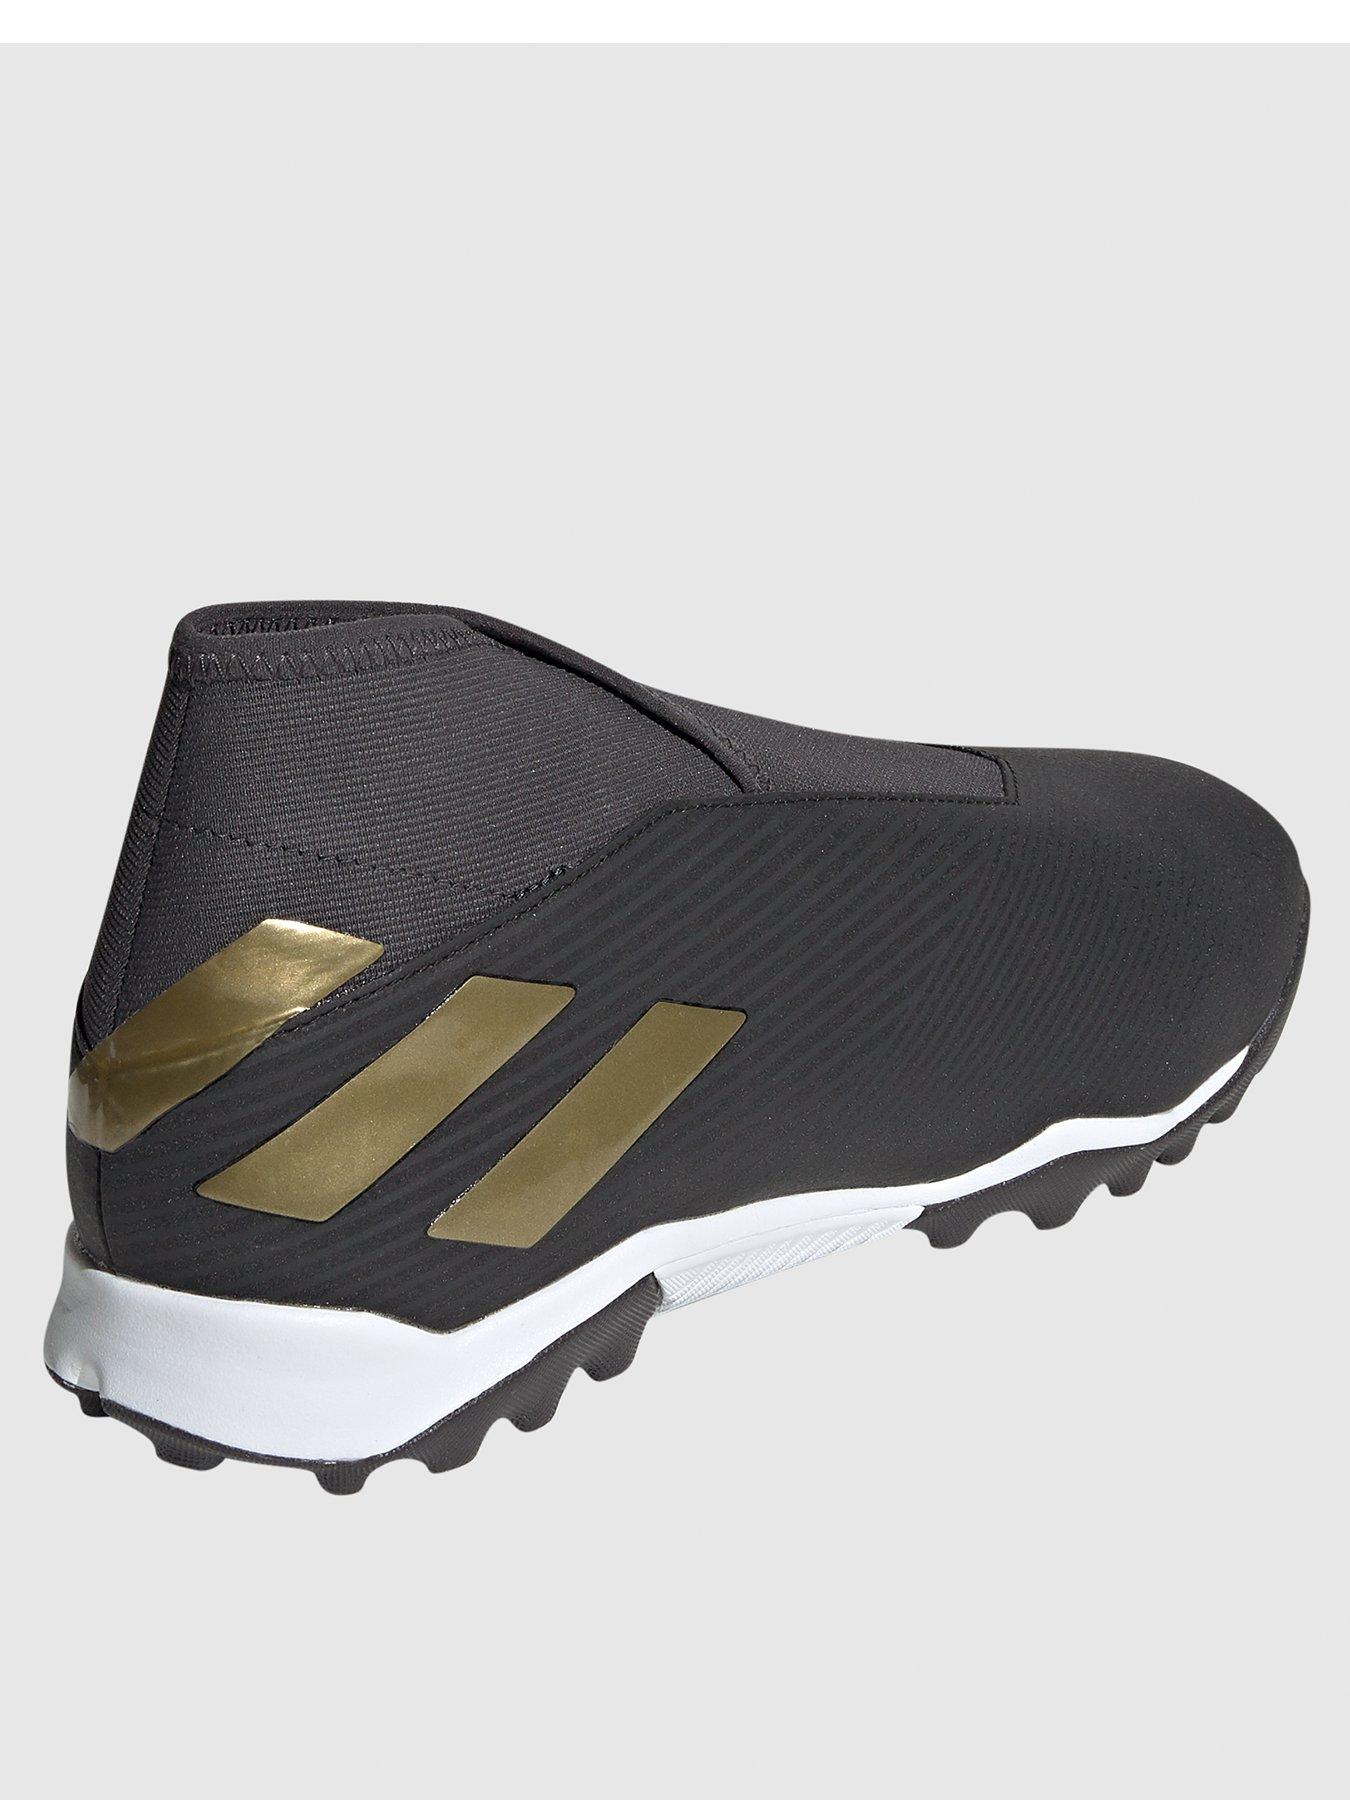 astro turf boots laceless